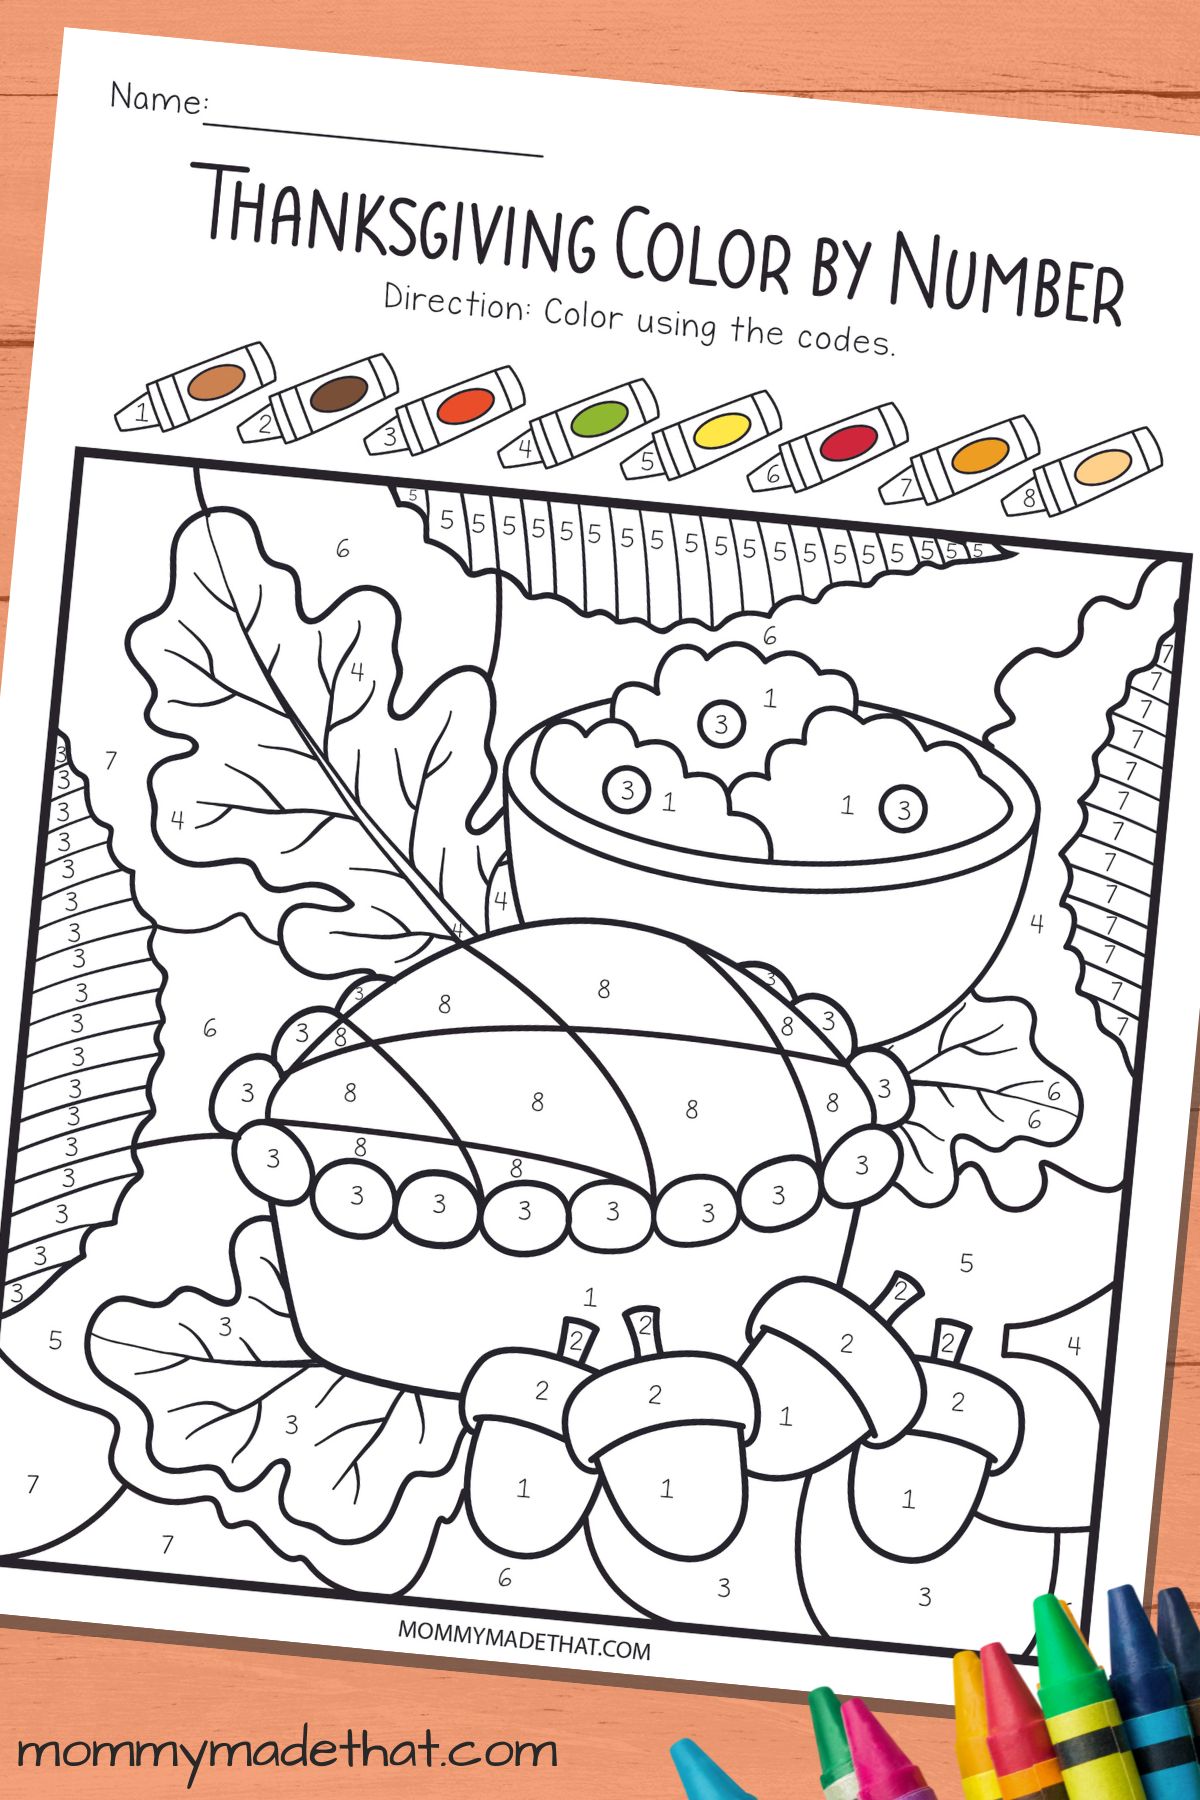 Thanksgiving color by number page